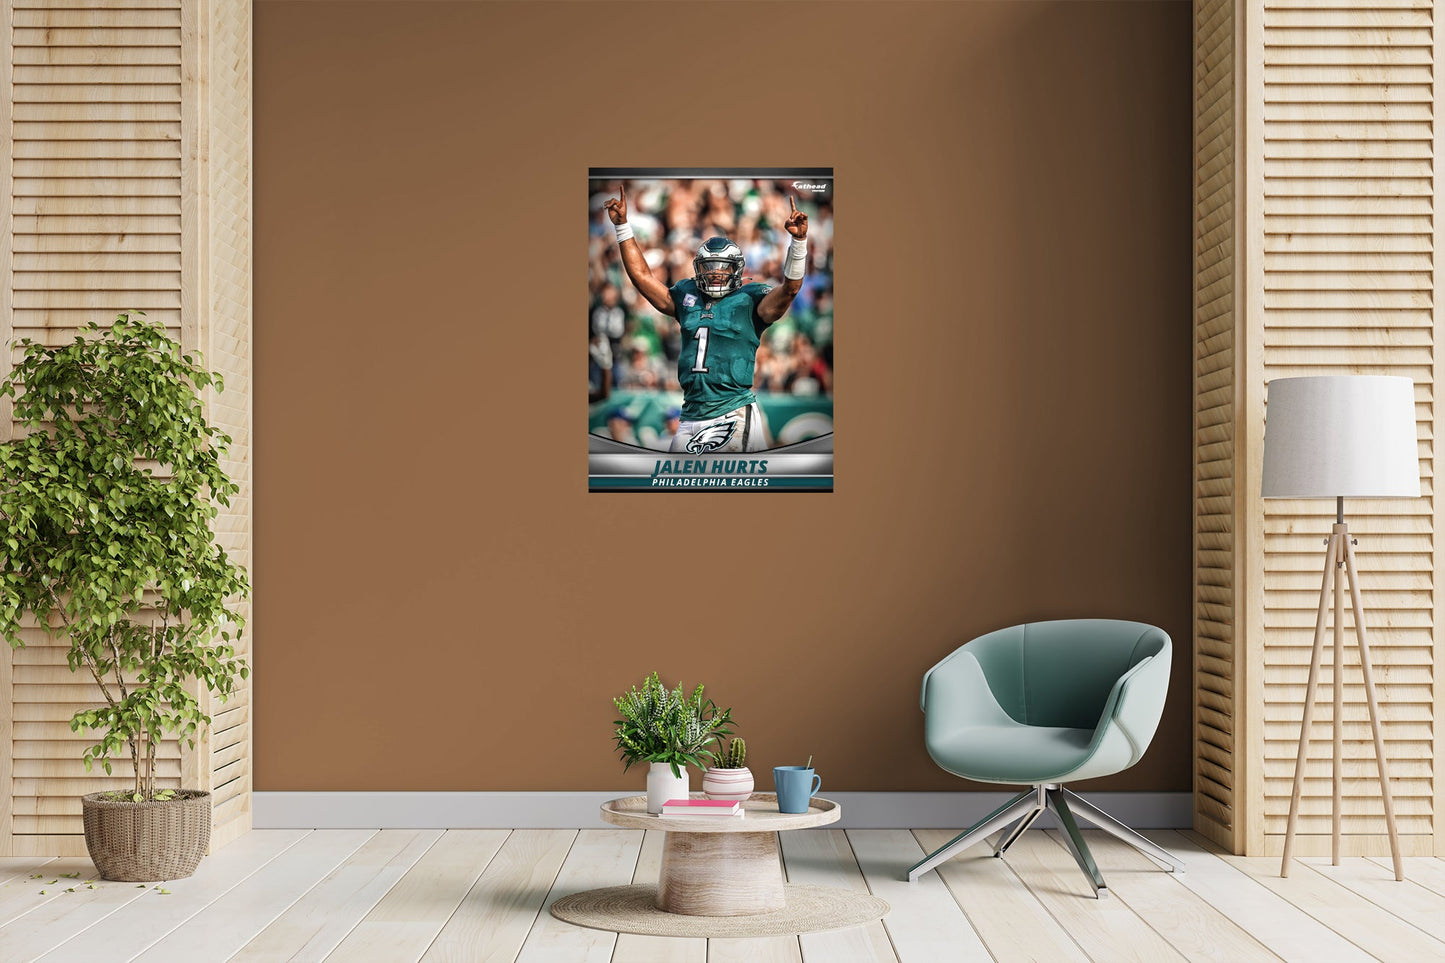 Philadelphia Eagles: Jalen Hurts No.1 Poster - Officially Licensed NFL Removable Adhesive Decal